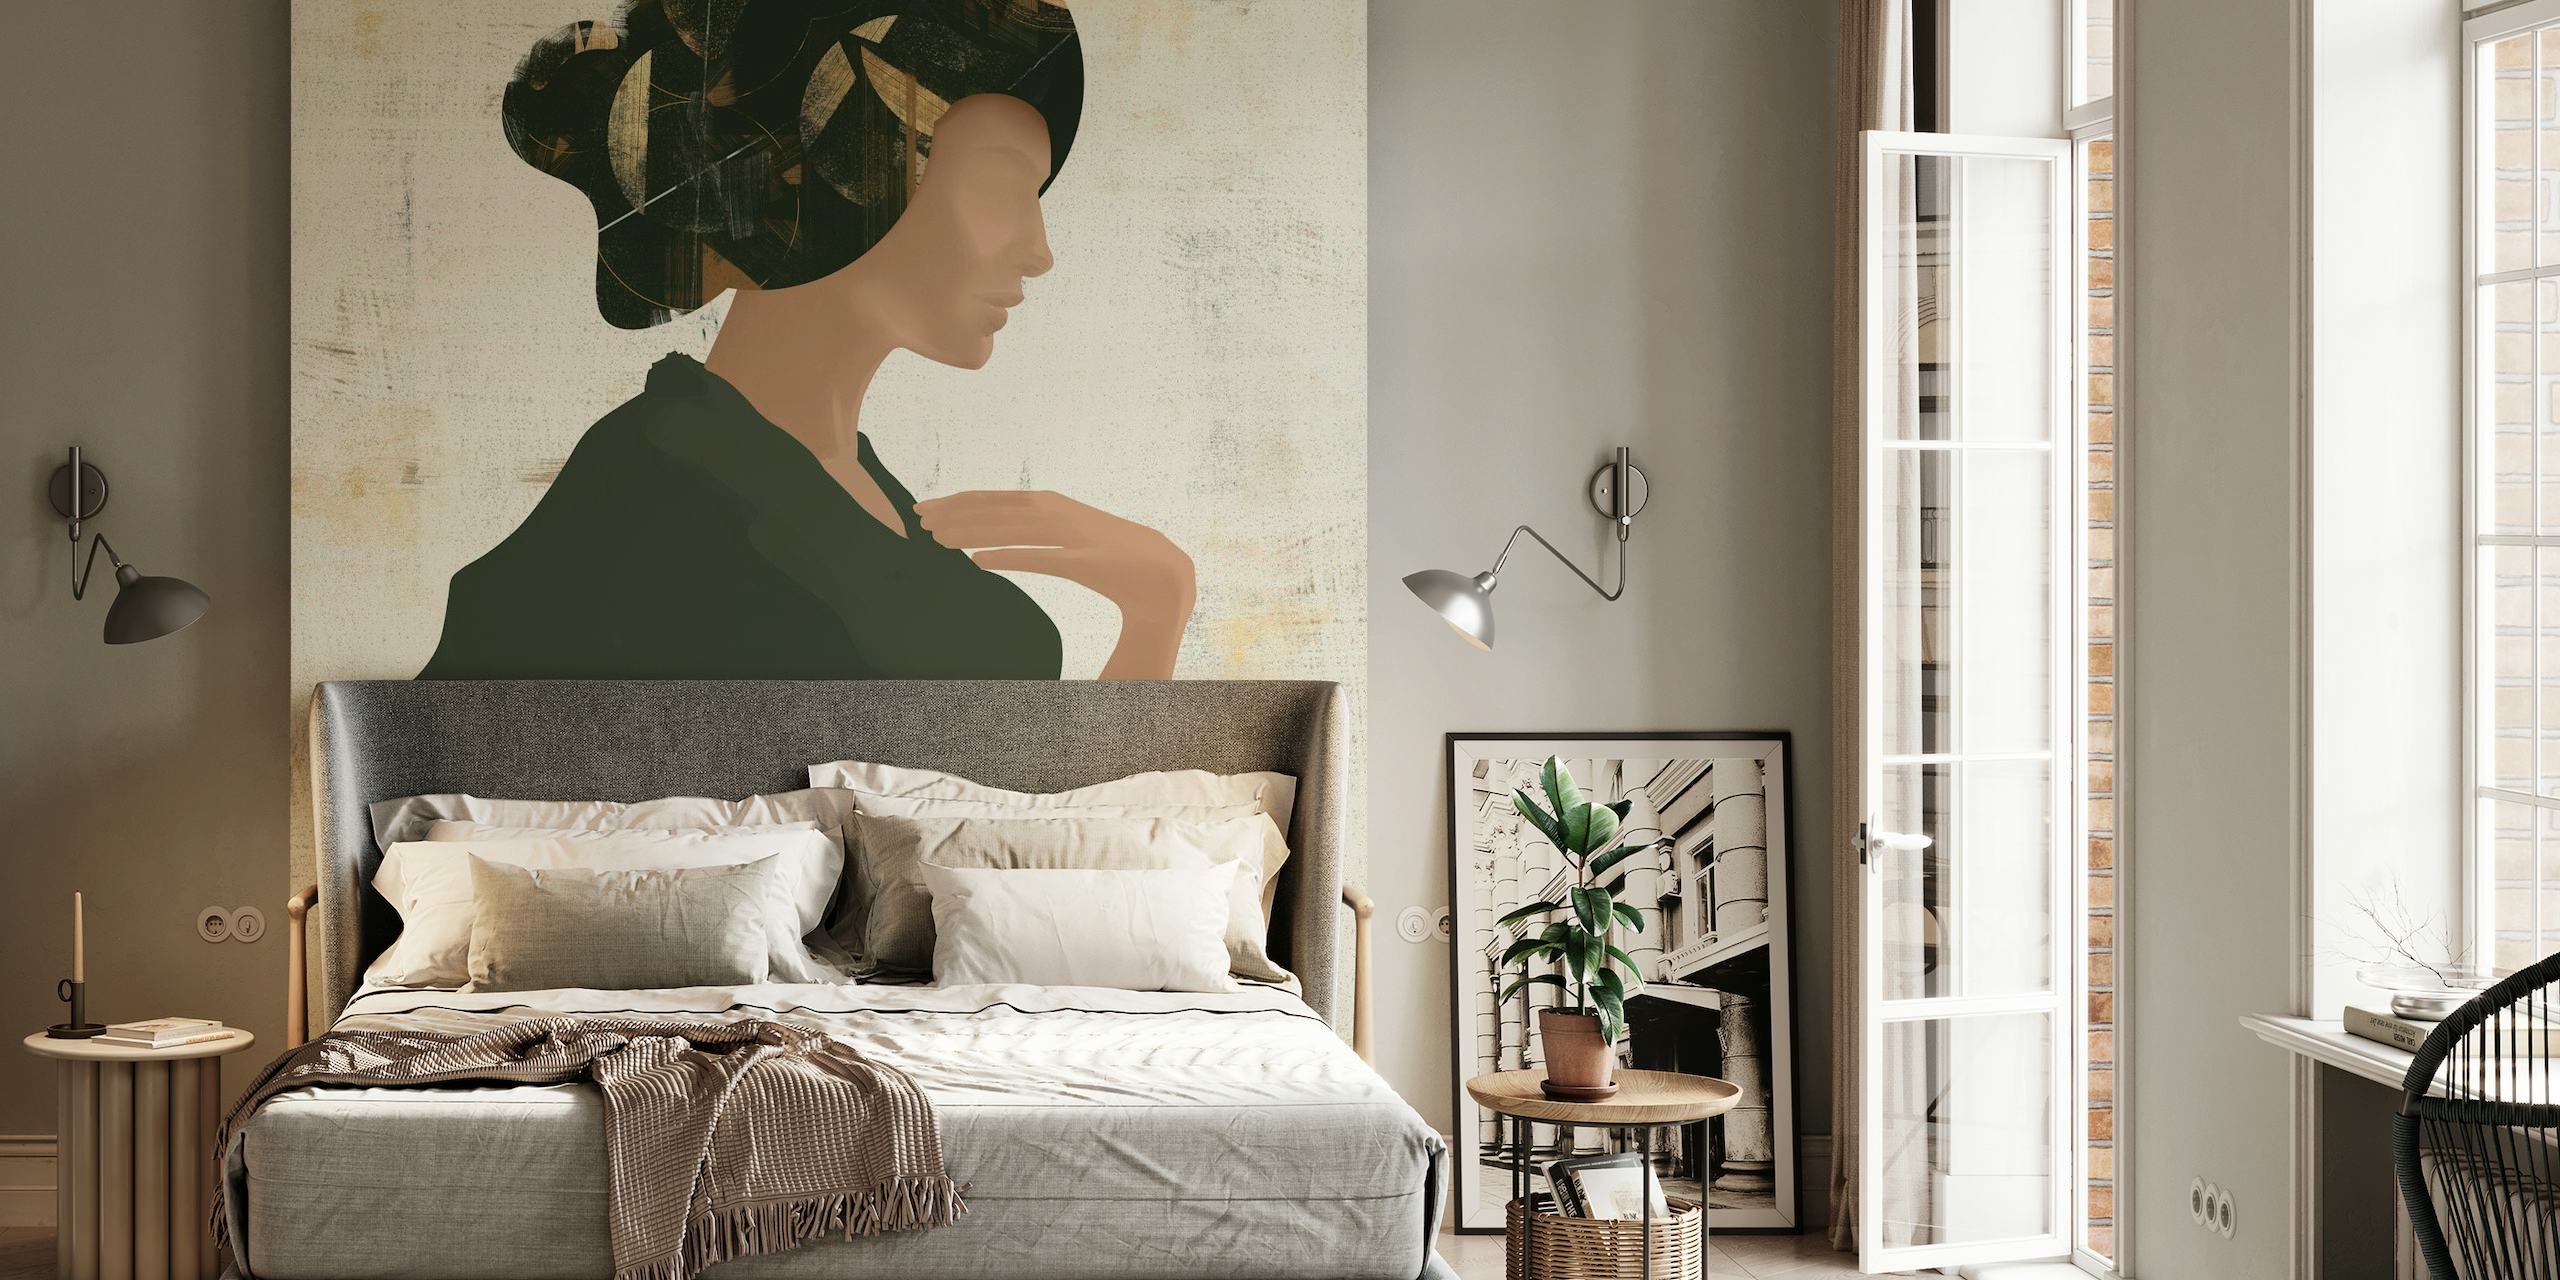 Elegant wall mural of a woman's silhouette in green on a beige background